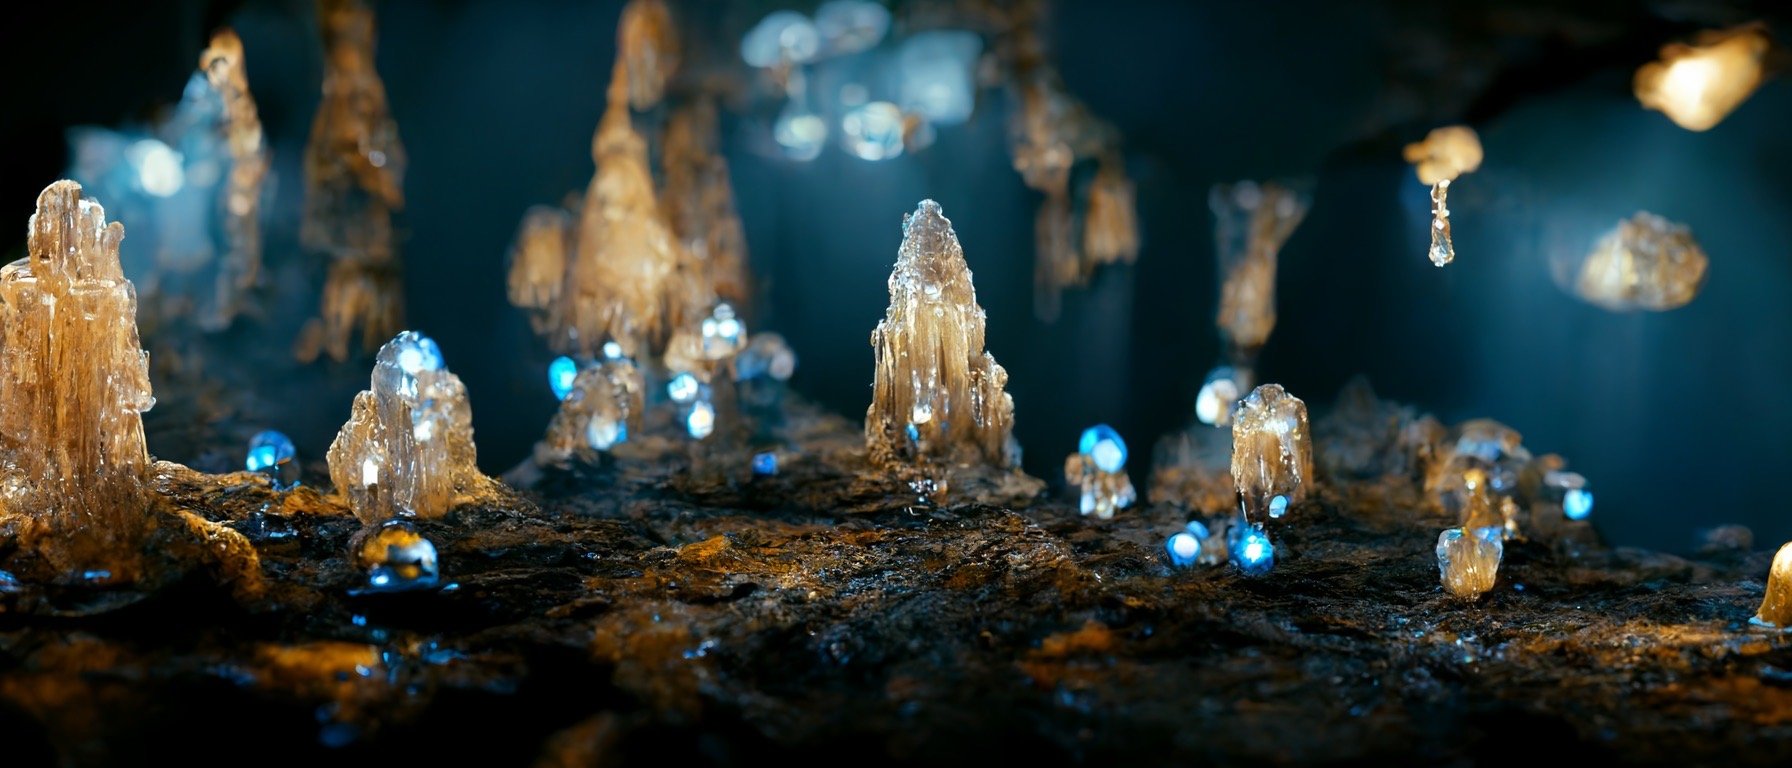 513fa79d-2582-471f-8fe7-51a7b6cdbd51_S3RAPH_httpss.mj.run2csSsj__incredible_mystical_cave_filled_with_sapphires._Stalactites_and_stalagmites_dri.JPG